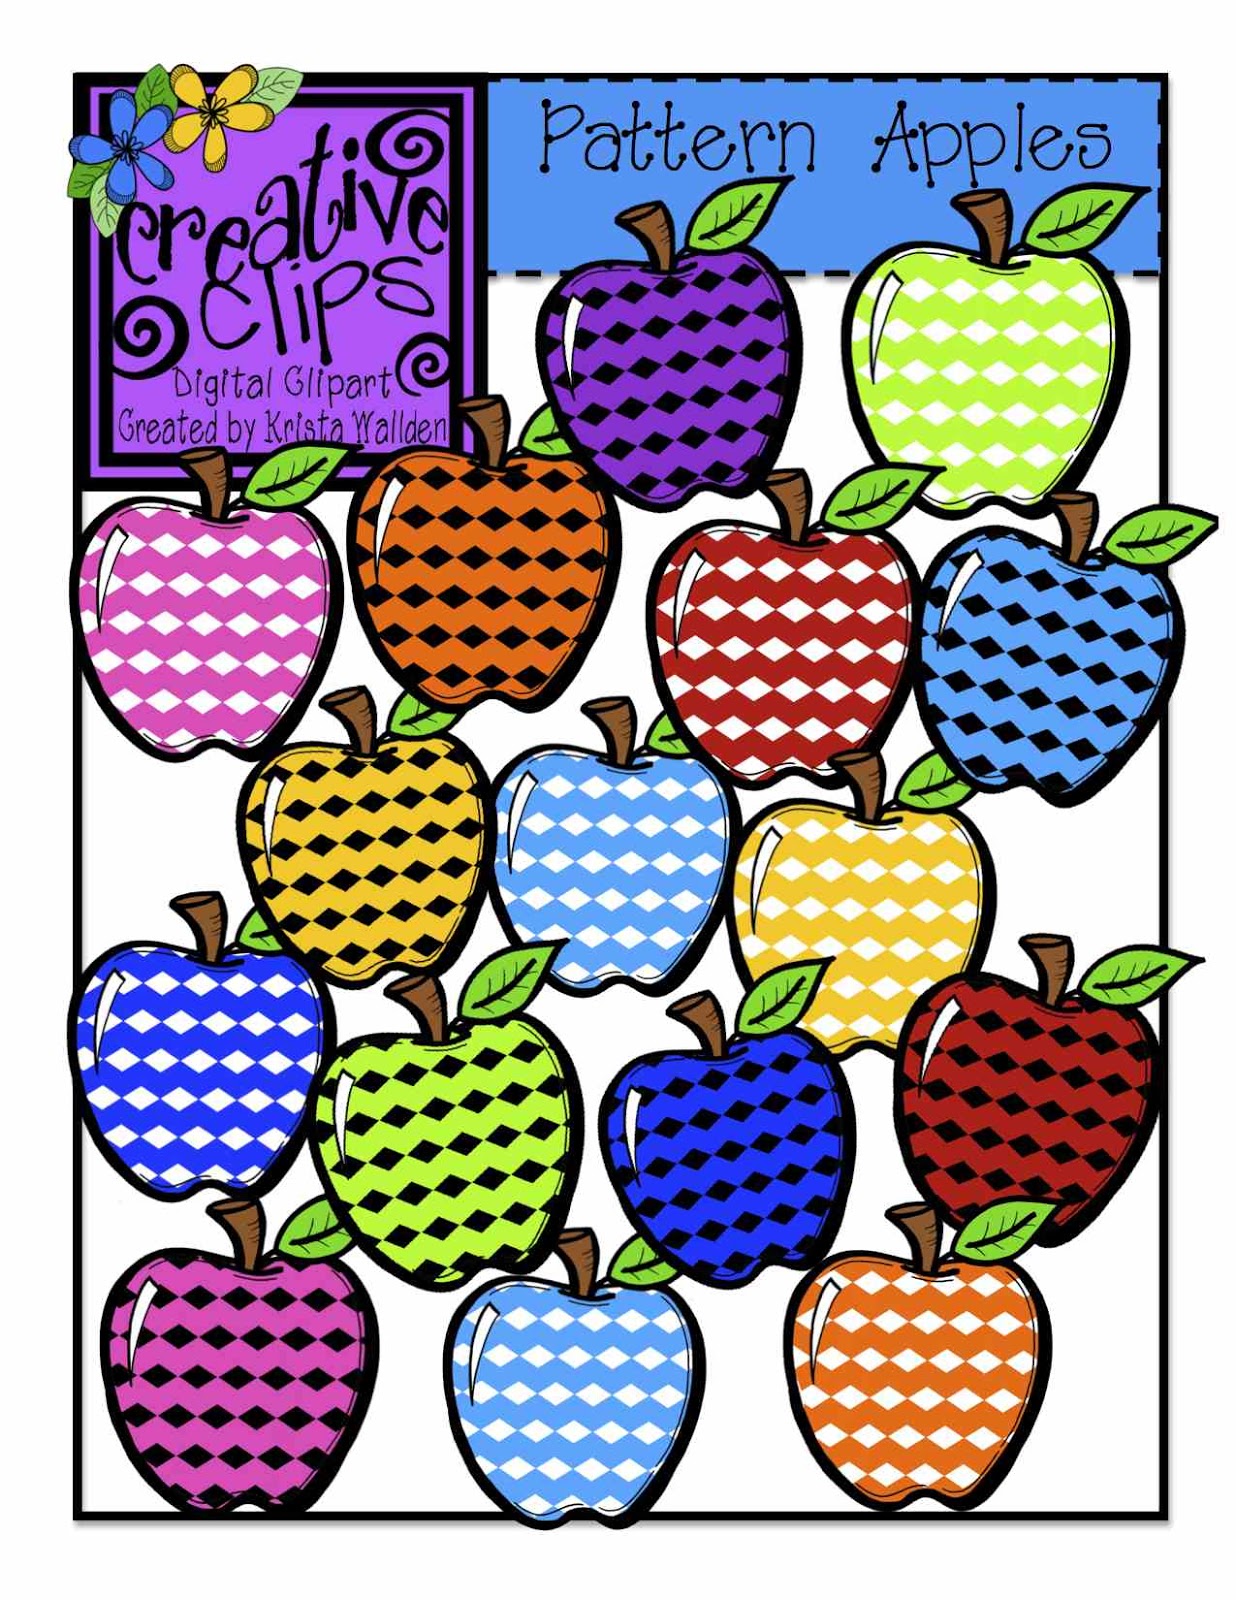 The Creative Chalkboard: FREE Rainbow Apples and New Clipart Sets 